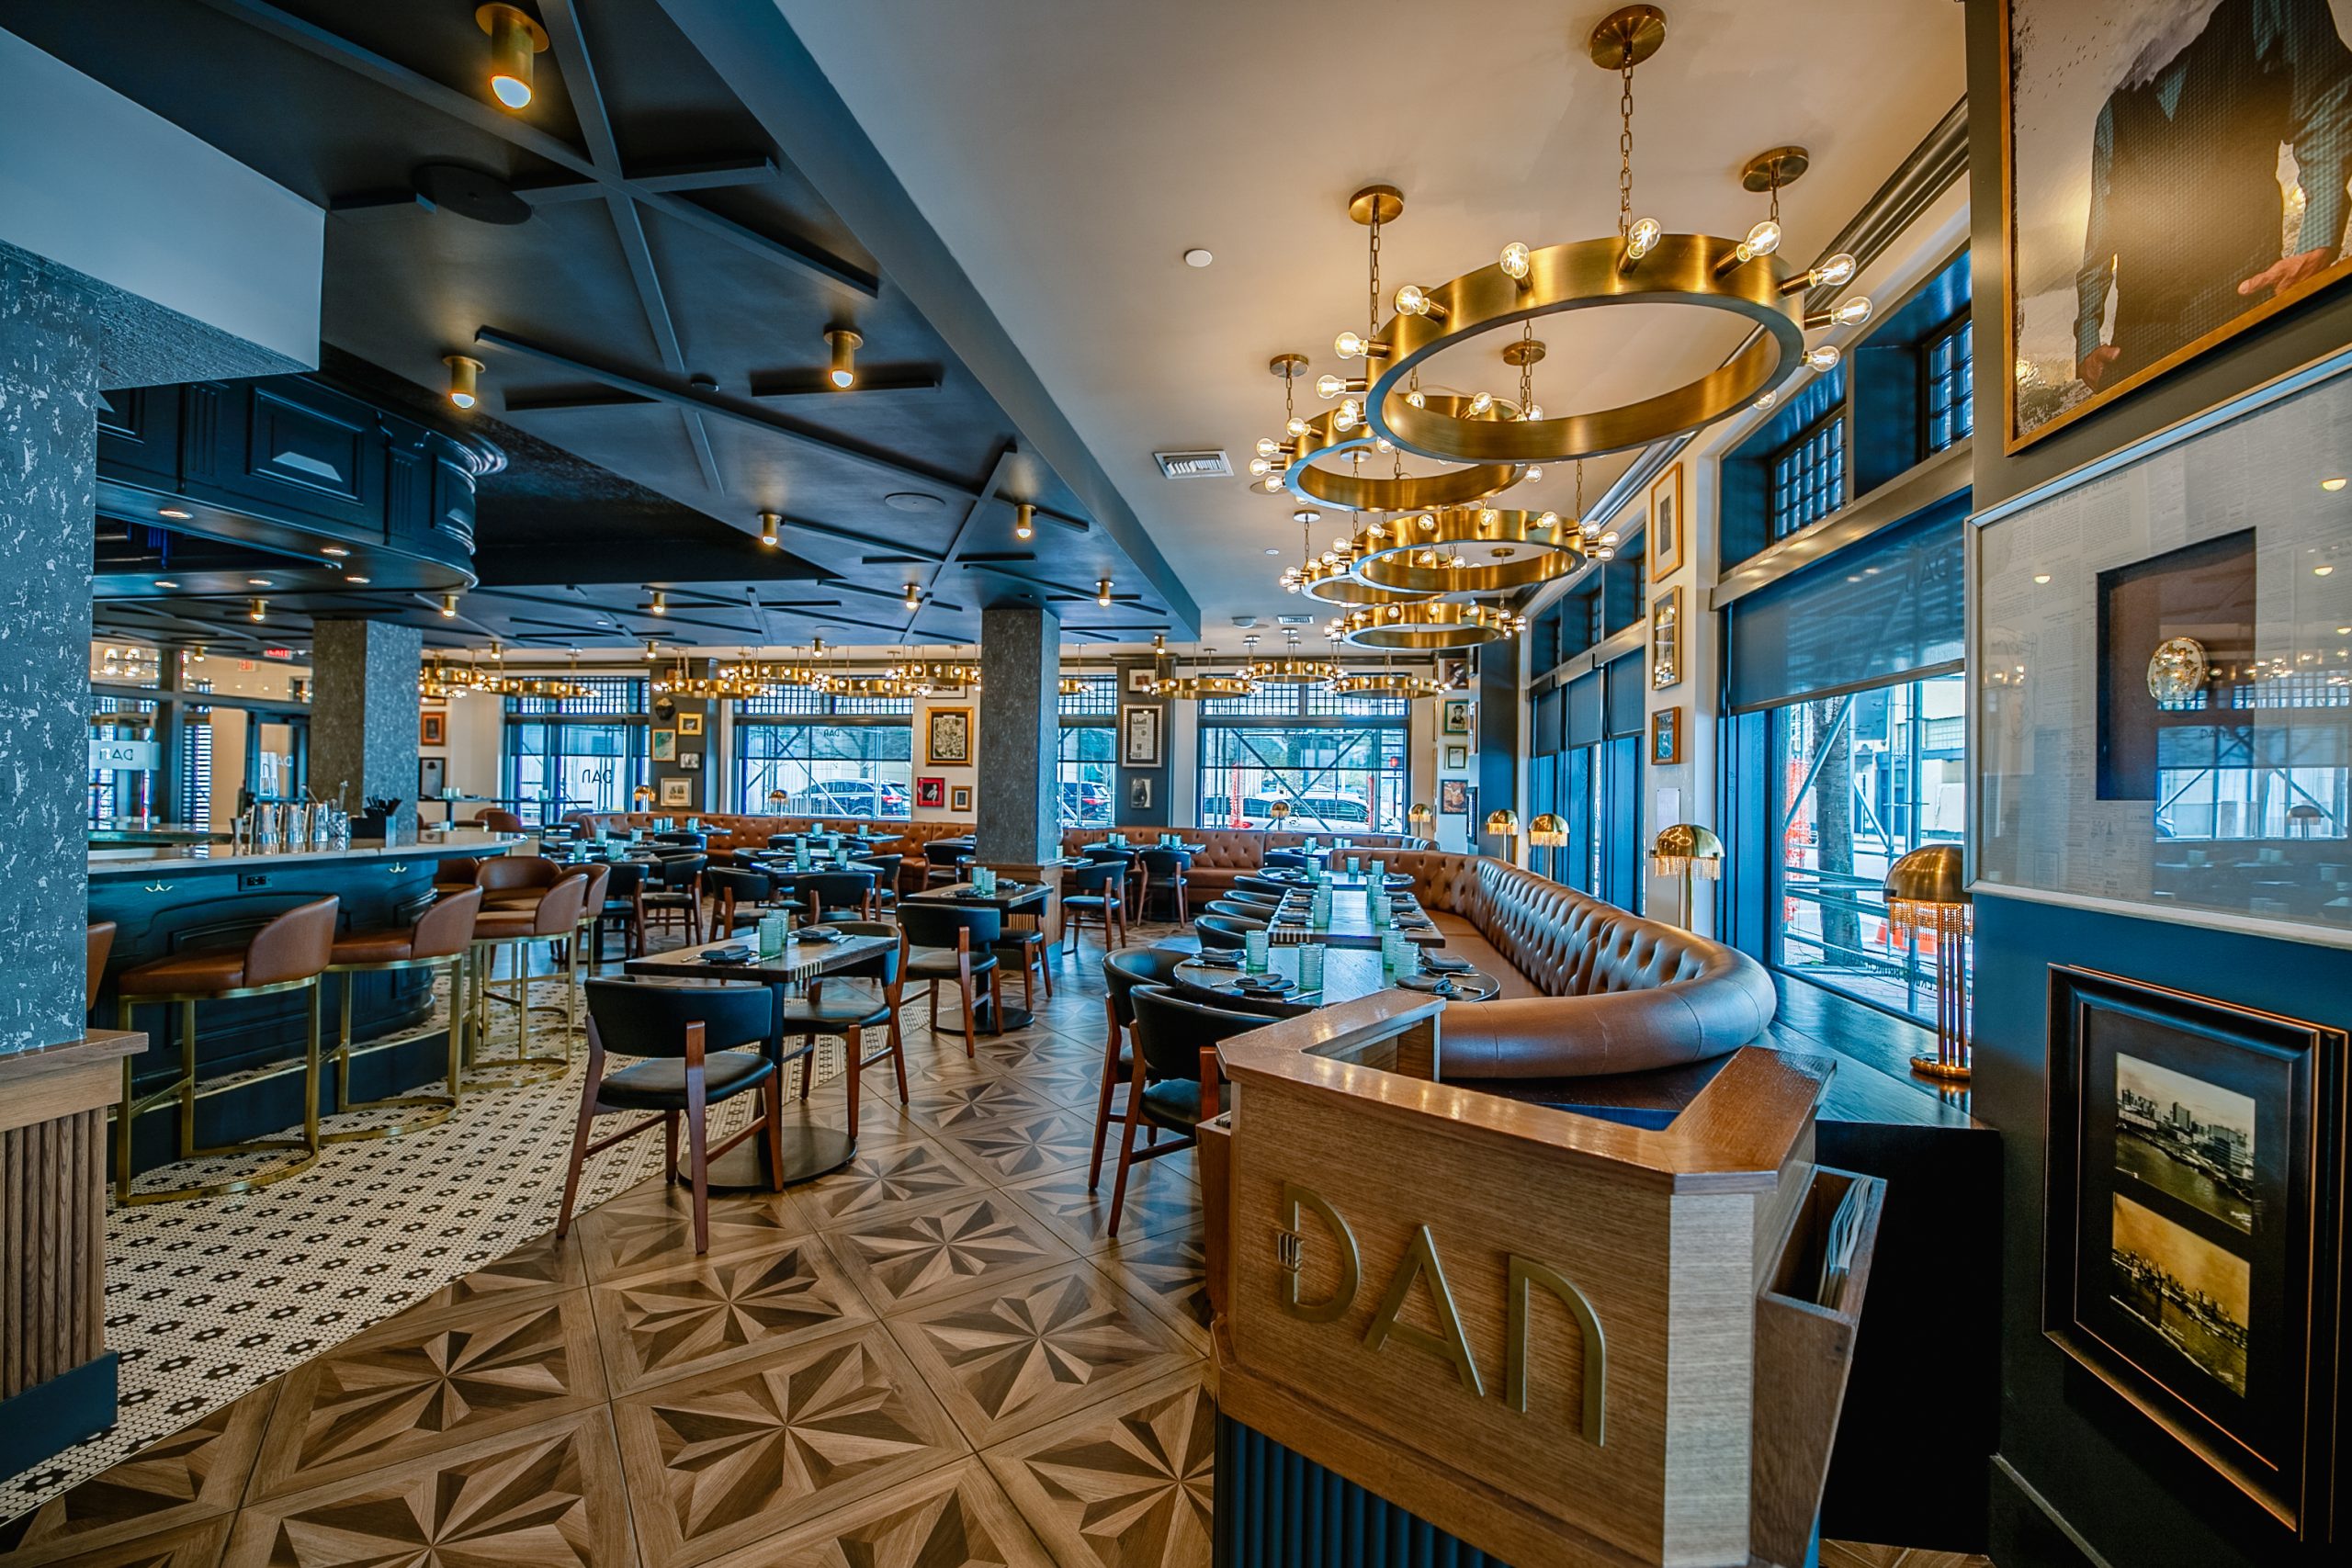 Hotel Flor’s “The Dan” Restaurant to Feature Thanksgiving Prix-Fixe Dinner